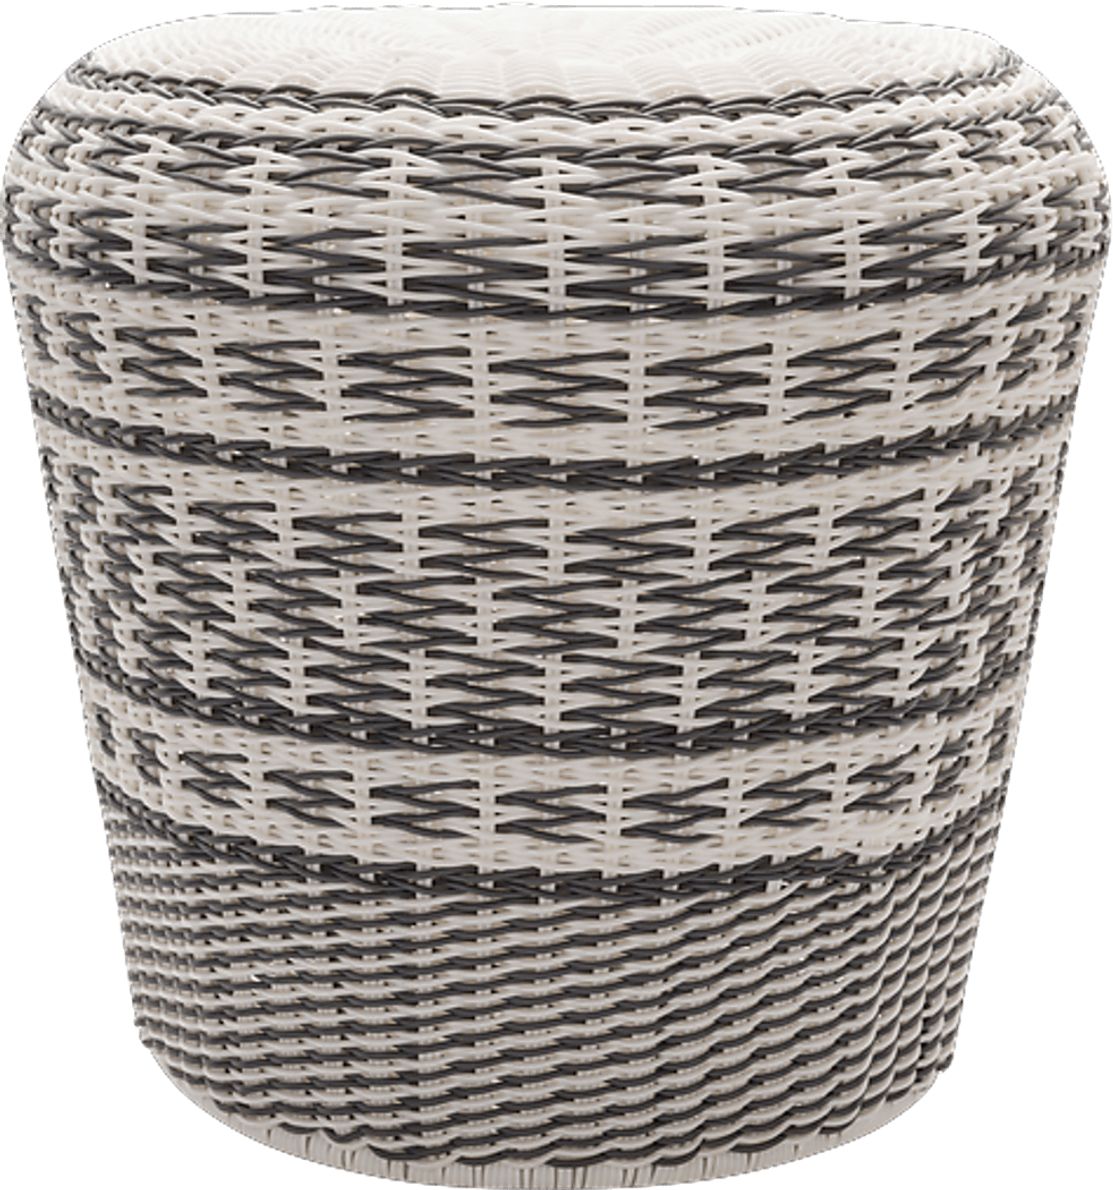 Mishal Gray Outdoor Stool